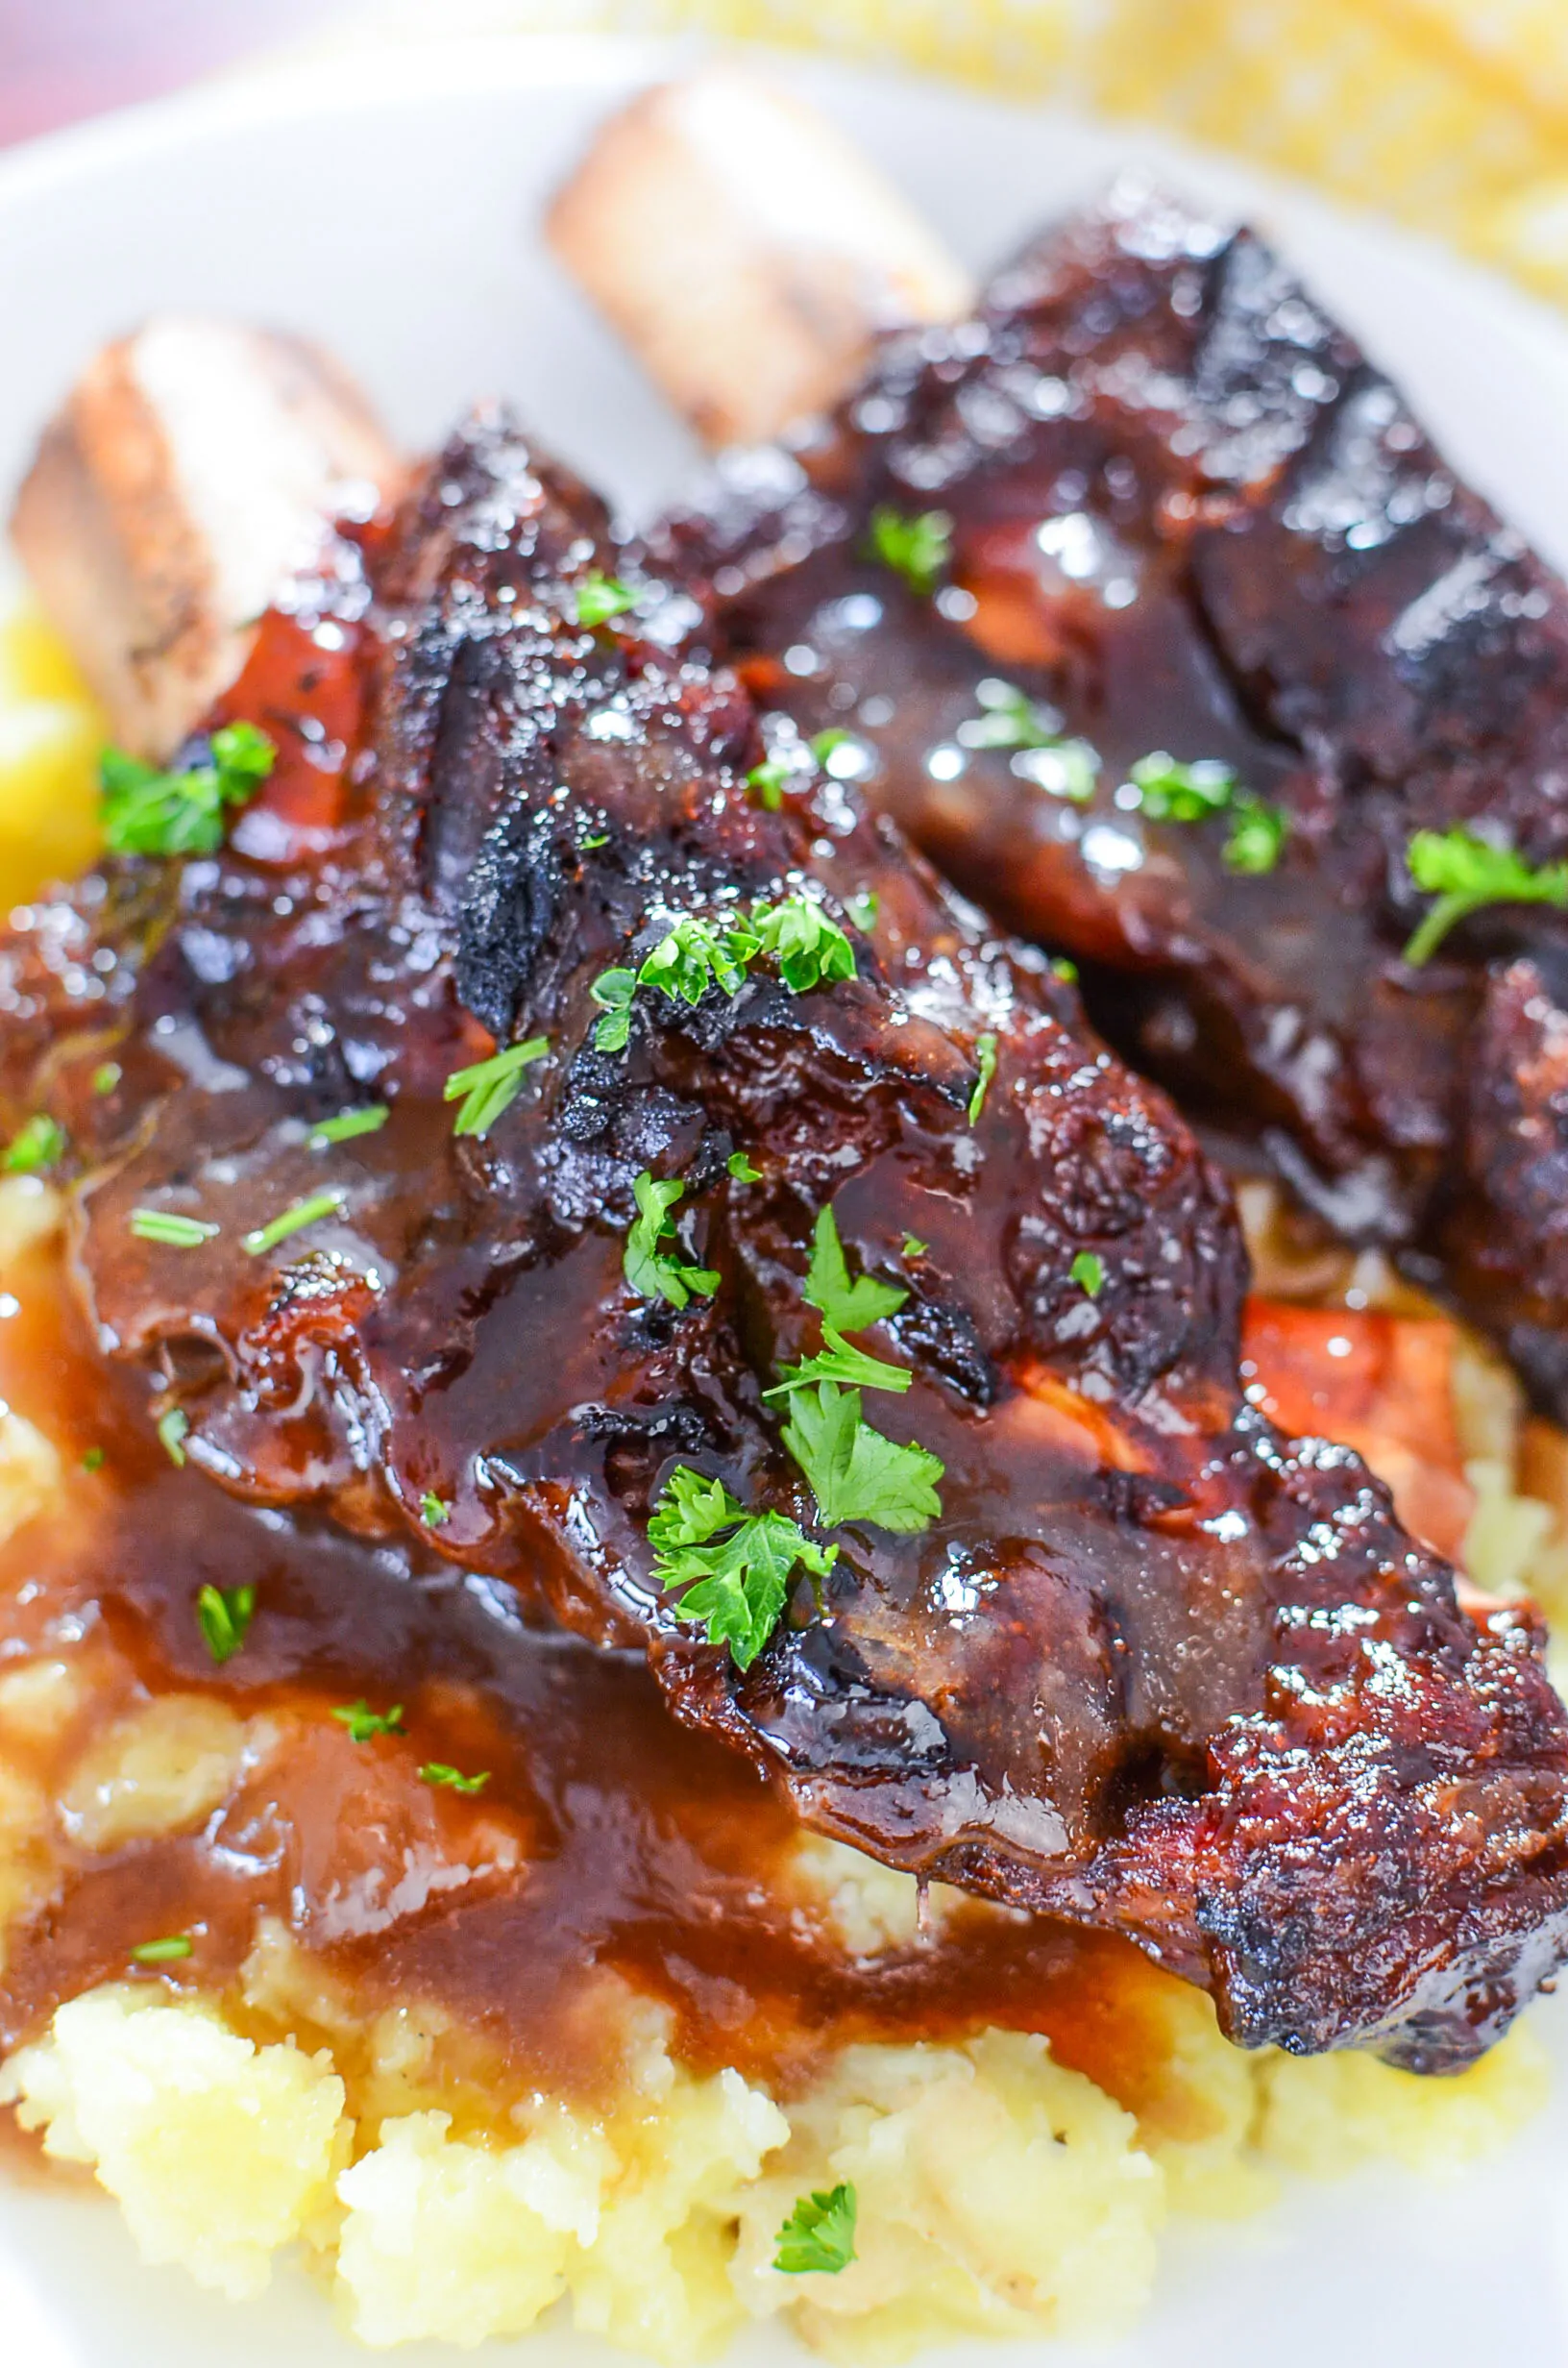 Two beef ribs on mashed potatoes with gravy over top.